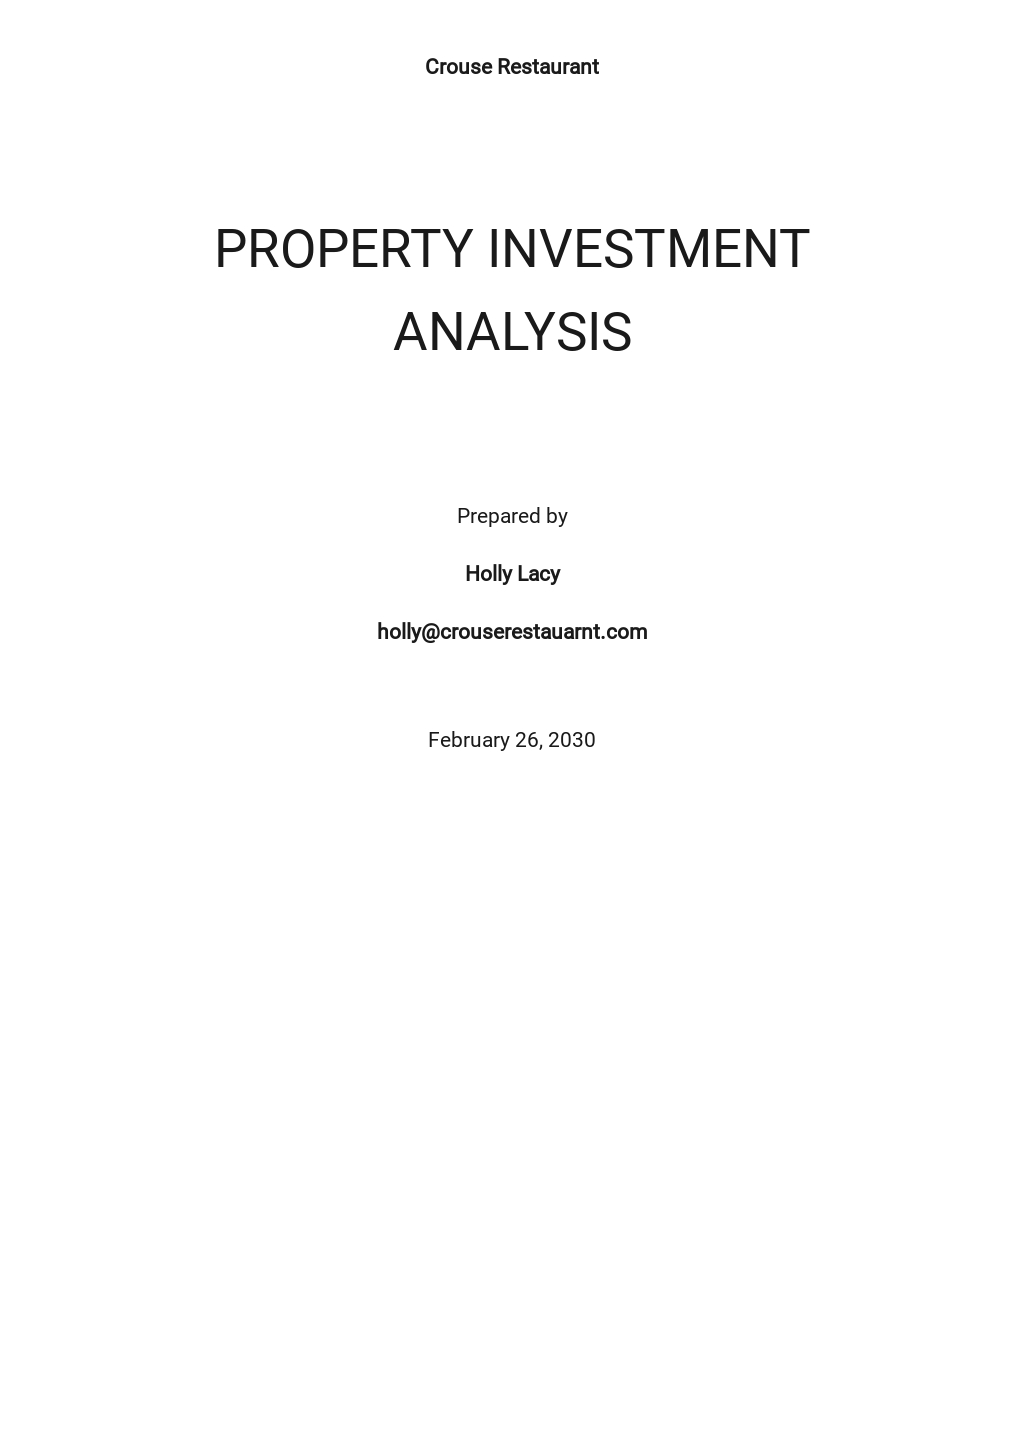 Investment Analysis Template.jpe